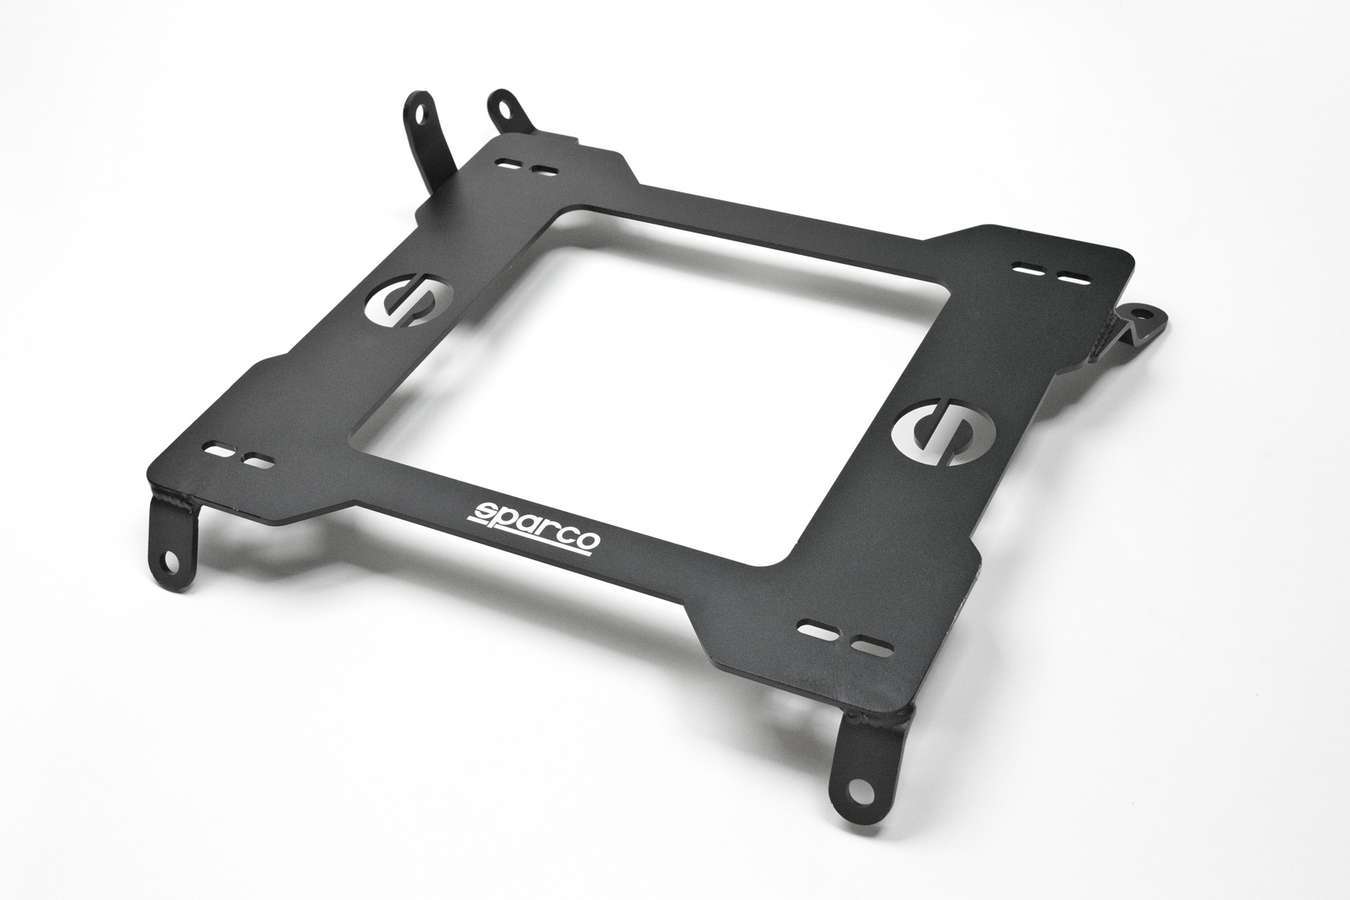 Sparco 600SB010L - Seat Adapter Bracket, 600 Series, Sparco to Driver Side Ford Mustang 1979-98, Steel, Black Powder Coat, Each